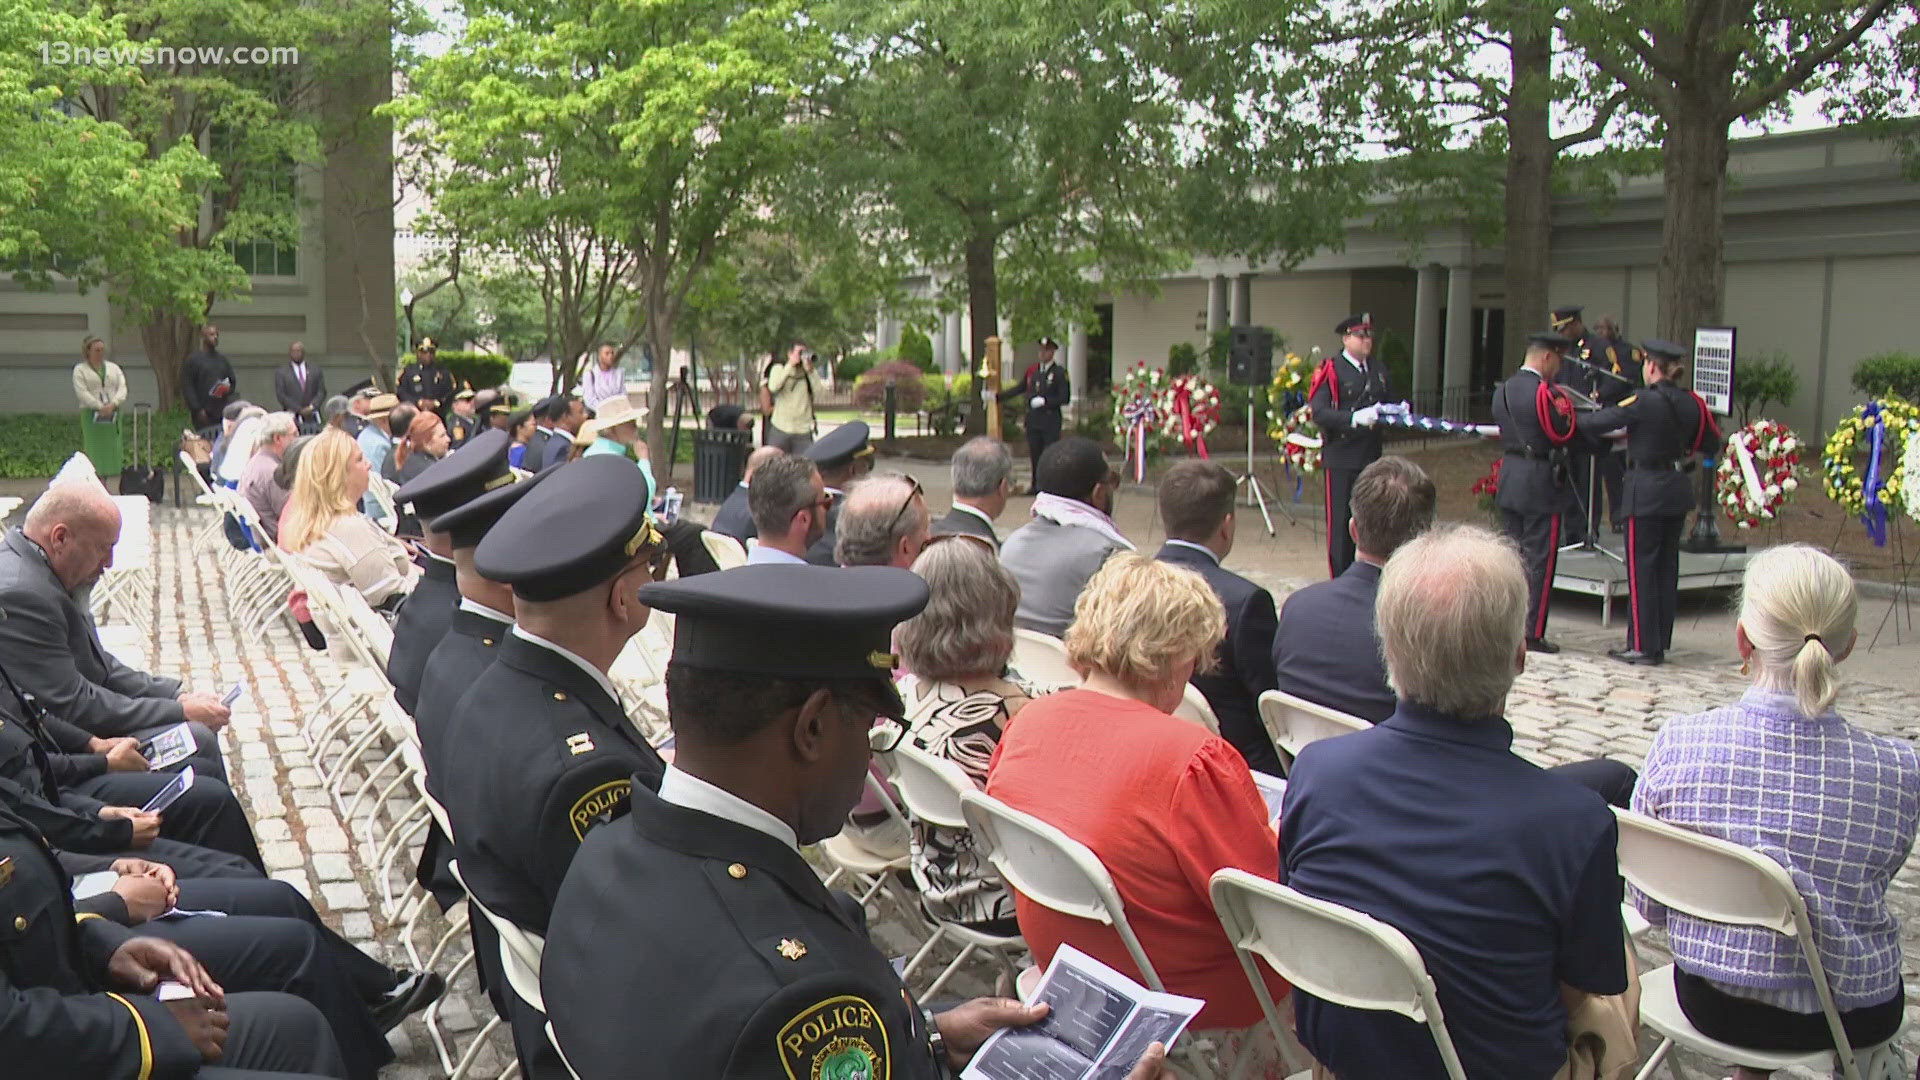 On Tuesday, the City of Norfolk honored officers who lost their lives in the line of duty with a memorial service.